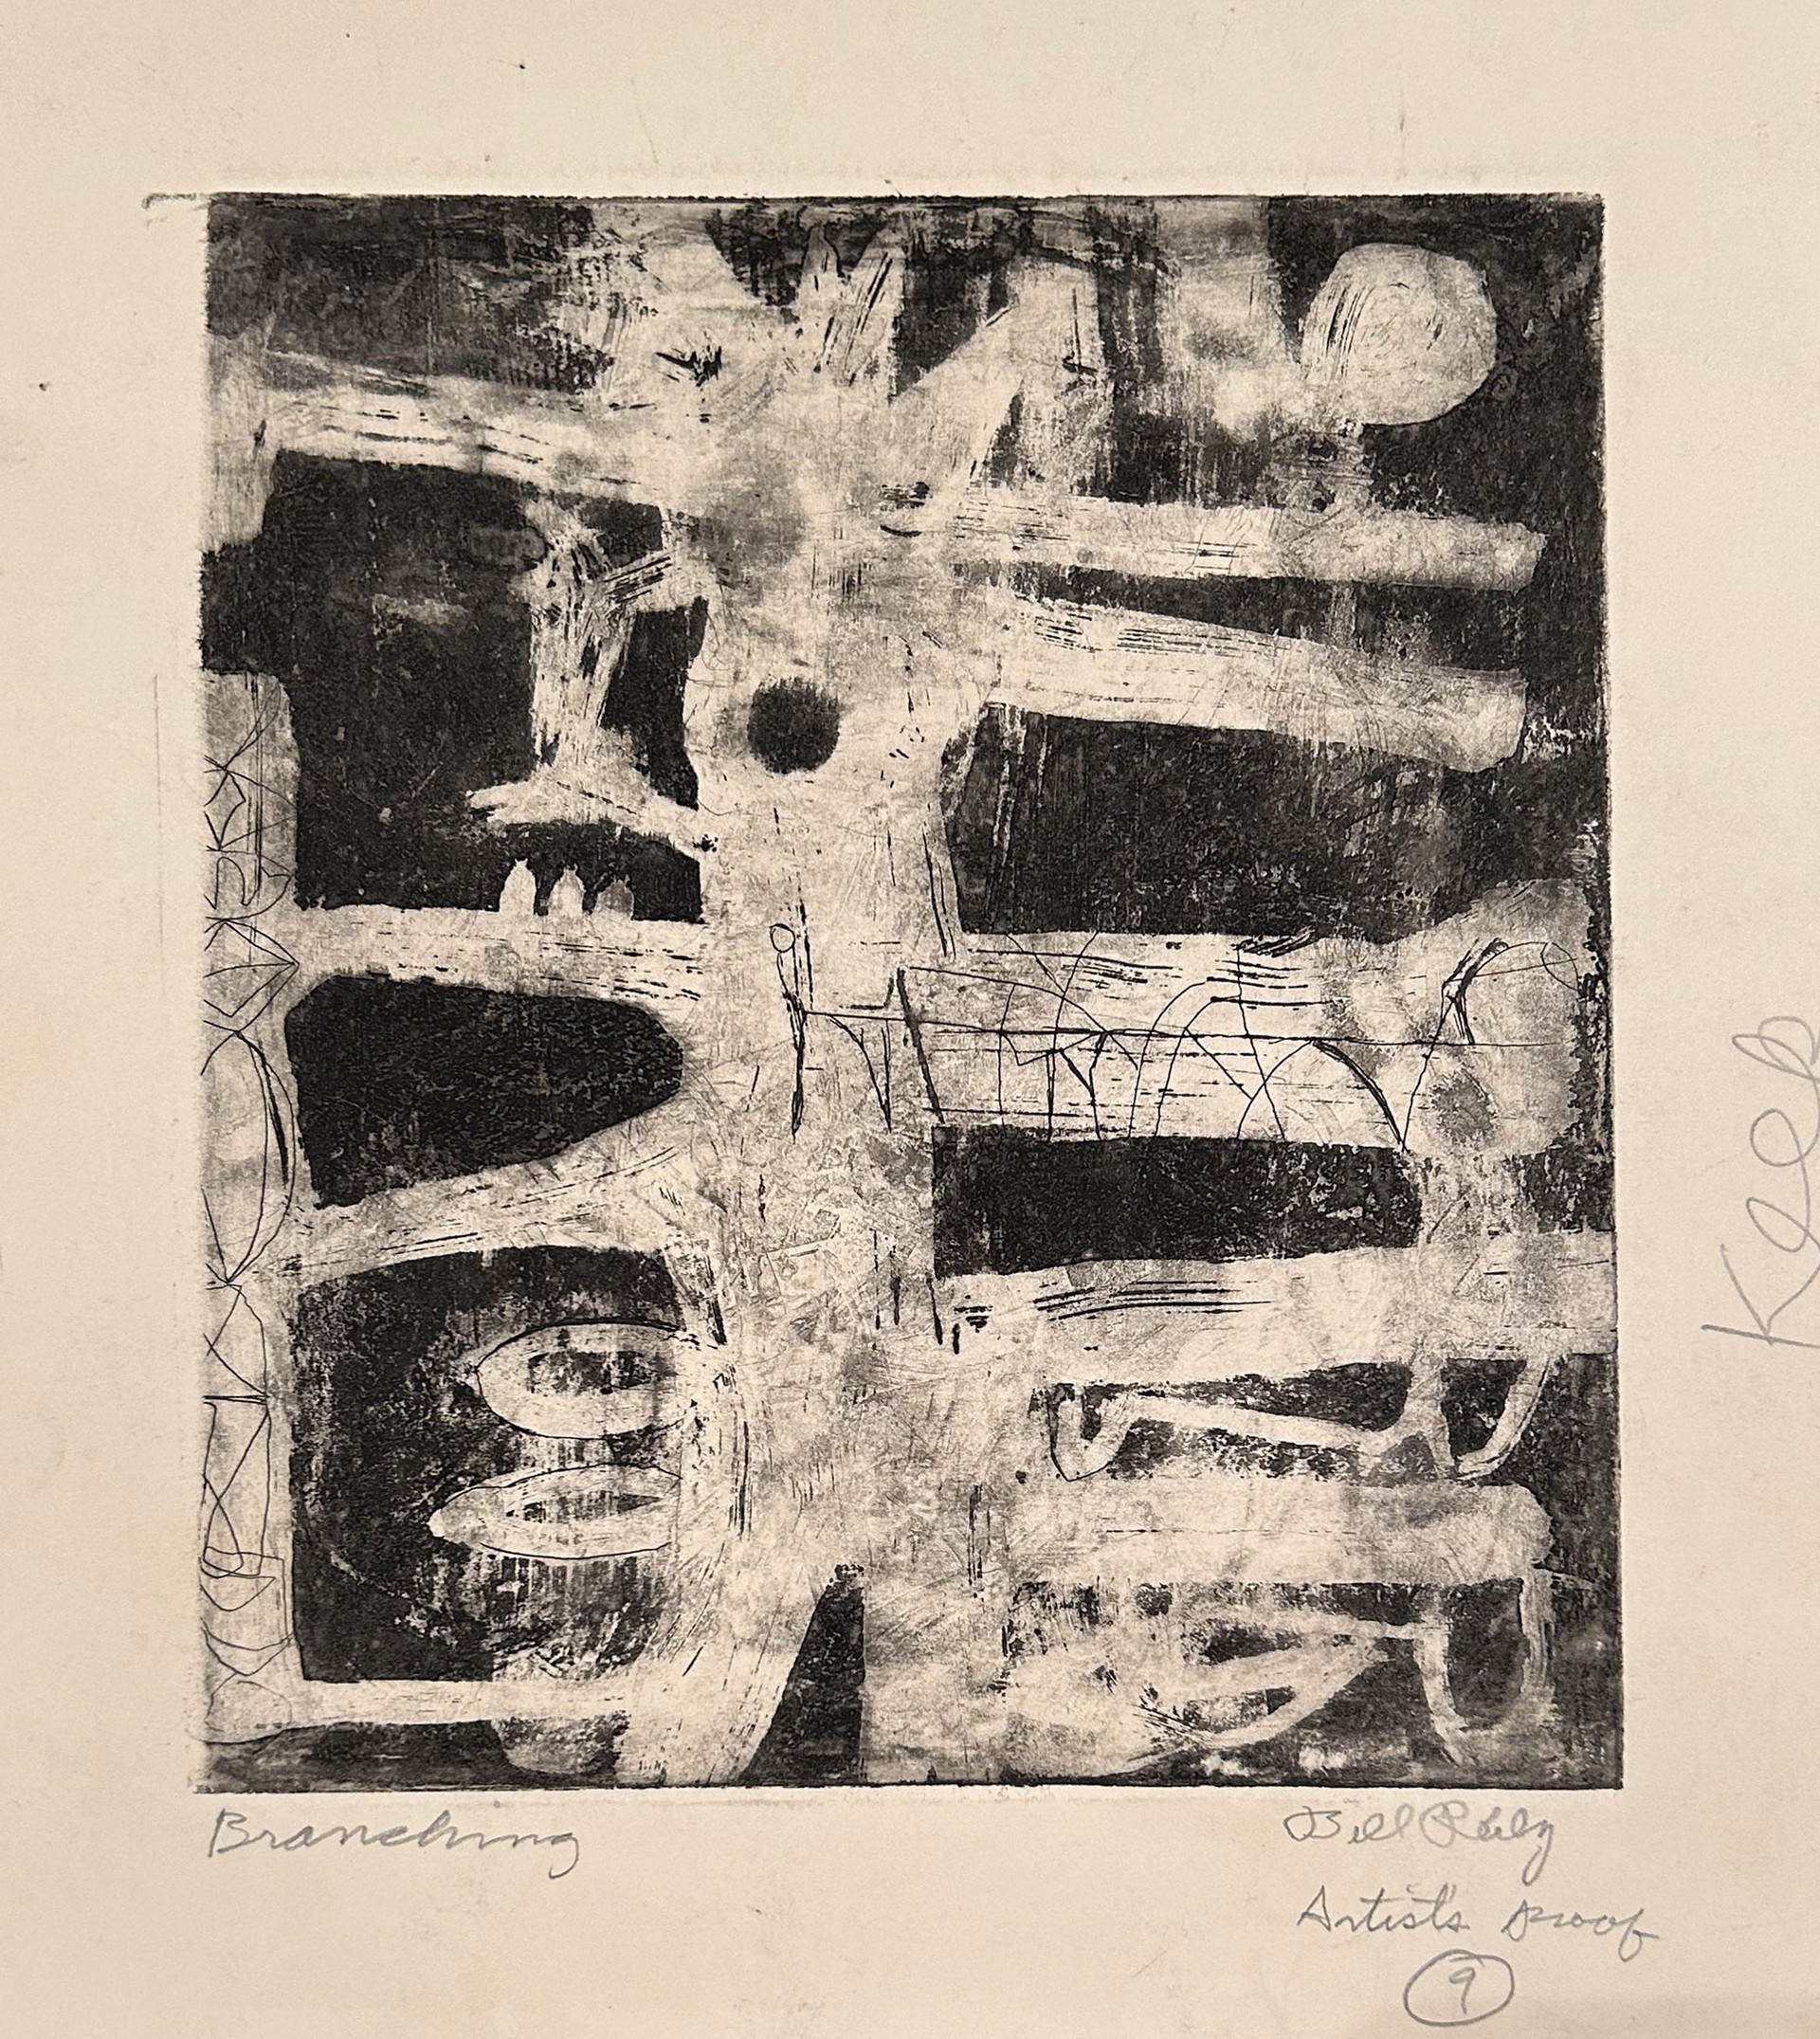 9. Branching (2 prints, including 1 Artist's proof) by Bill Reily - Prints